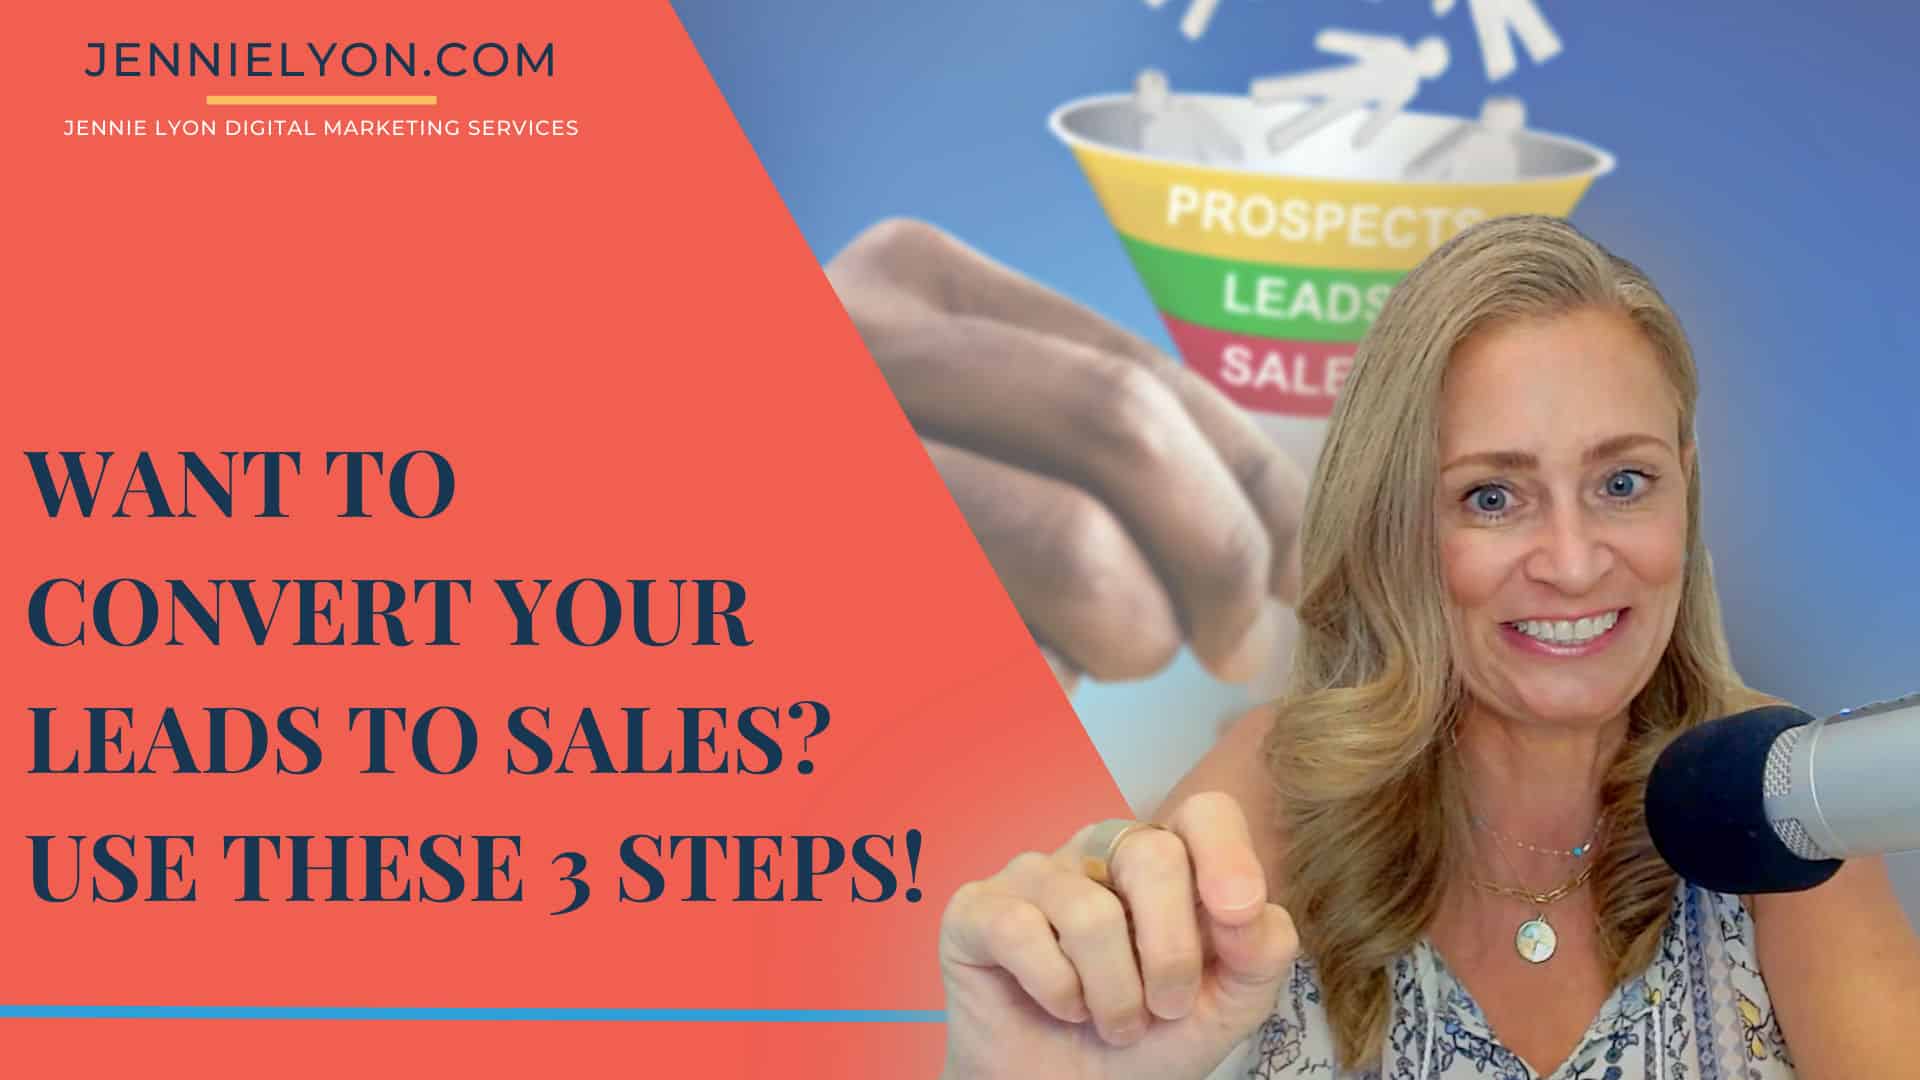 Want to Convert Your Leads to Sales? Use These 3 Steps!